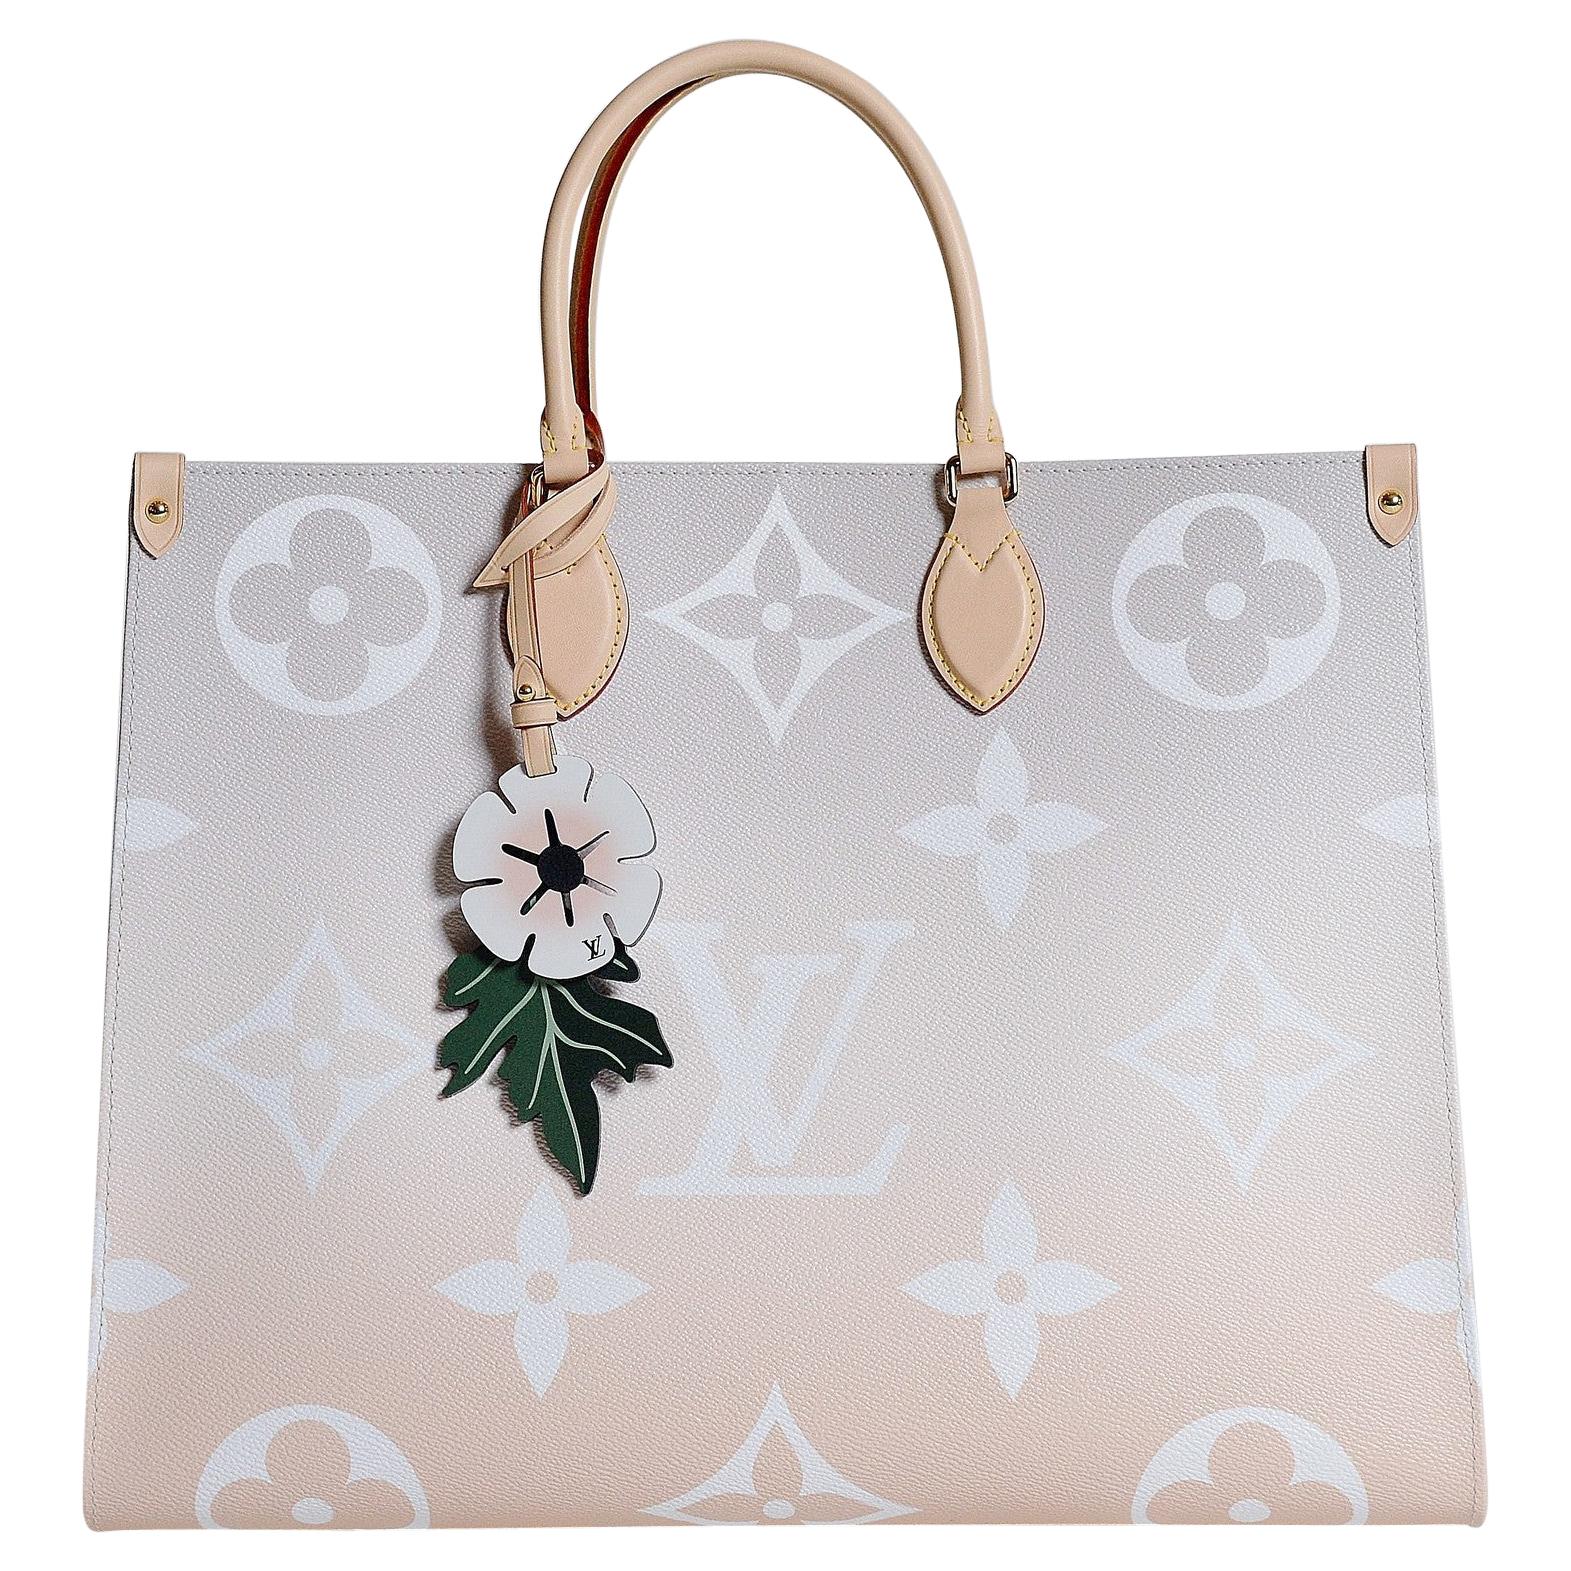 LV By The Pool Collection Collection for Women